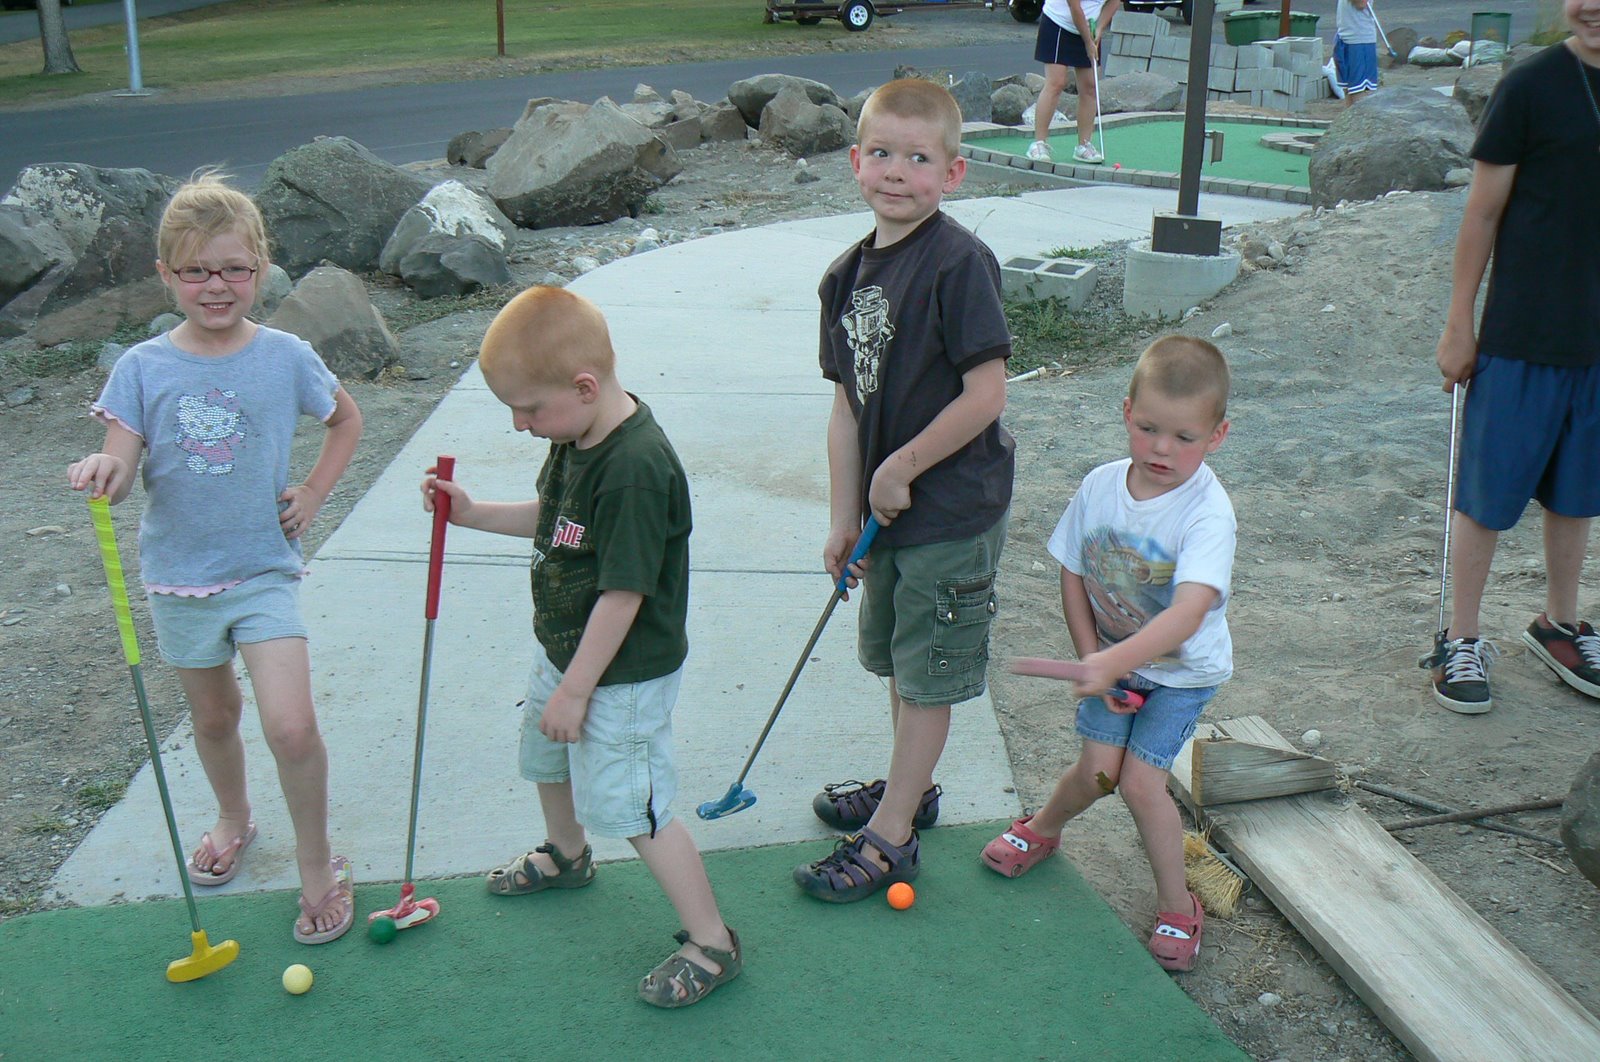 [All+kids+at+golf+course.JPG]